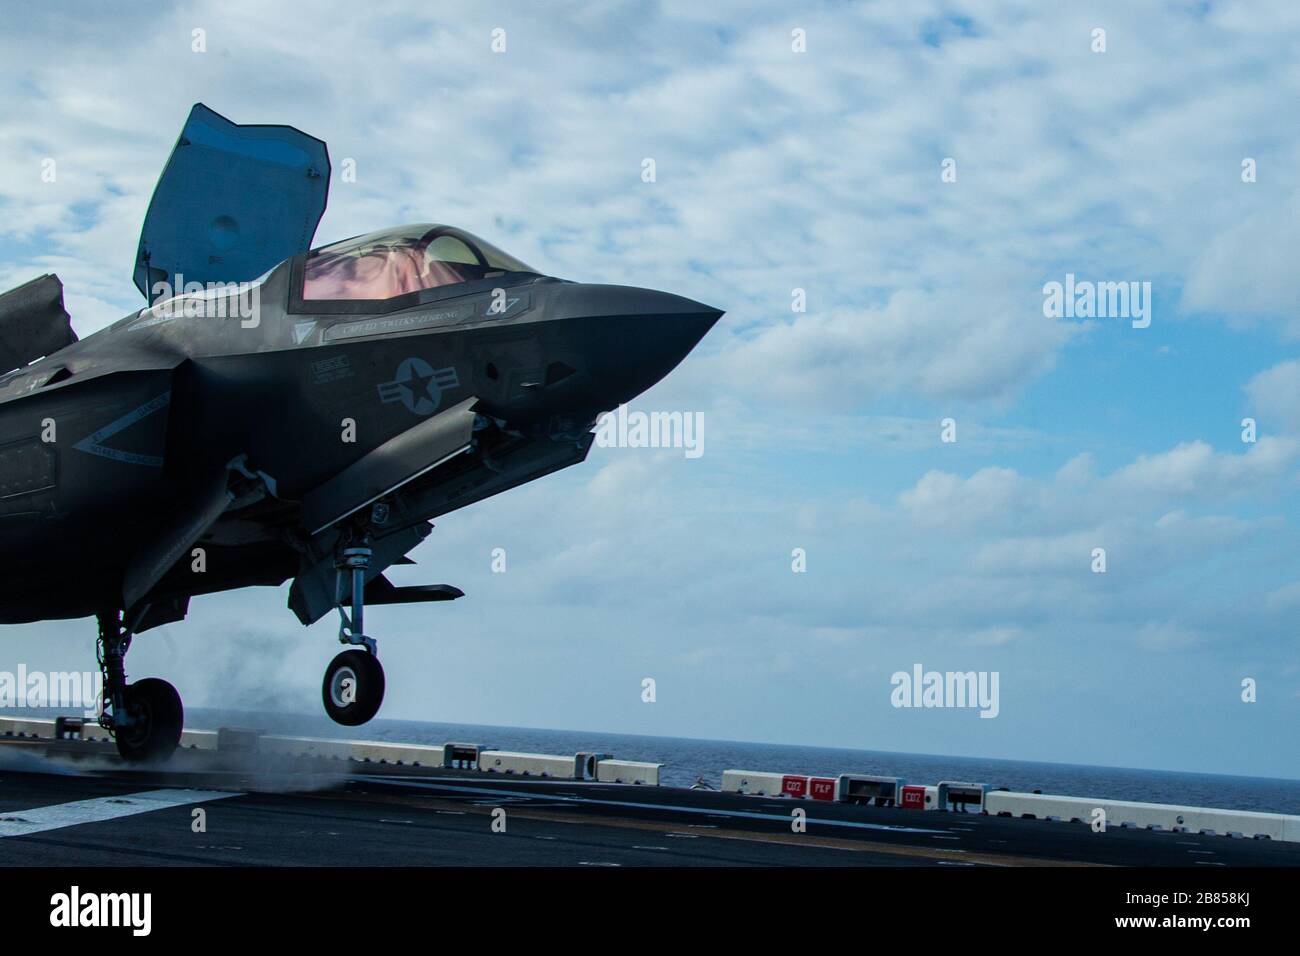 PHILIPPINE SEA (March 18, 2020) An F-35B Lightning II fighter aircraft with Marine Medium Tiltrotor Squadron 265 (Reinforced), 31st Marine Expeditionary Unit (MEU), takes off from the flight deck of amphibious assault ship USS America (LHA 6). America, flagship of the America Expeditionary Strike Group, 31st MEU team, is operating in the U.S. 7th Fleet area of operations to enhance interoperability with allies and partners and serve as a ready response force to defend peace and stability in the Indo-Pacific region. (Official U.S. Marine Corps photo by Cpl. Isaac Cantrell) Stock Photo